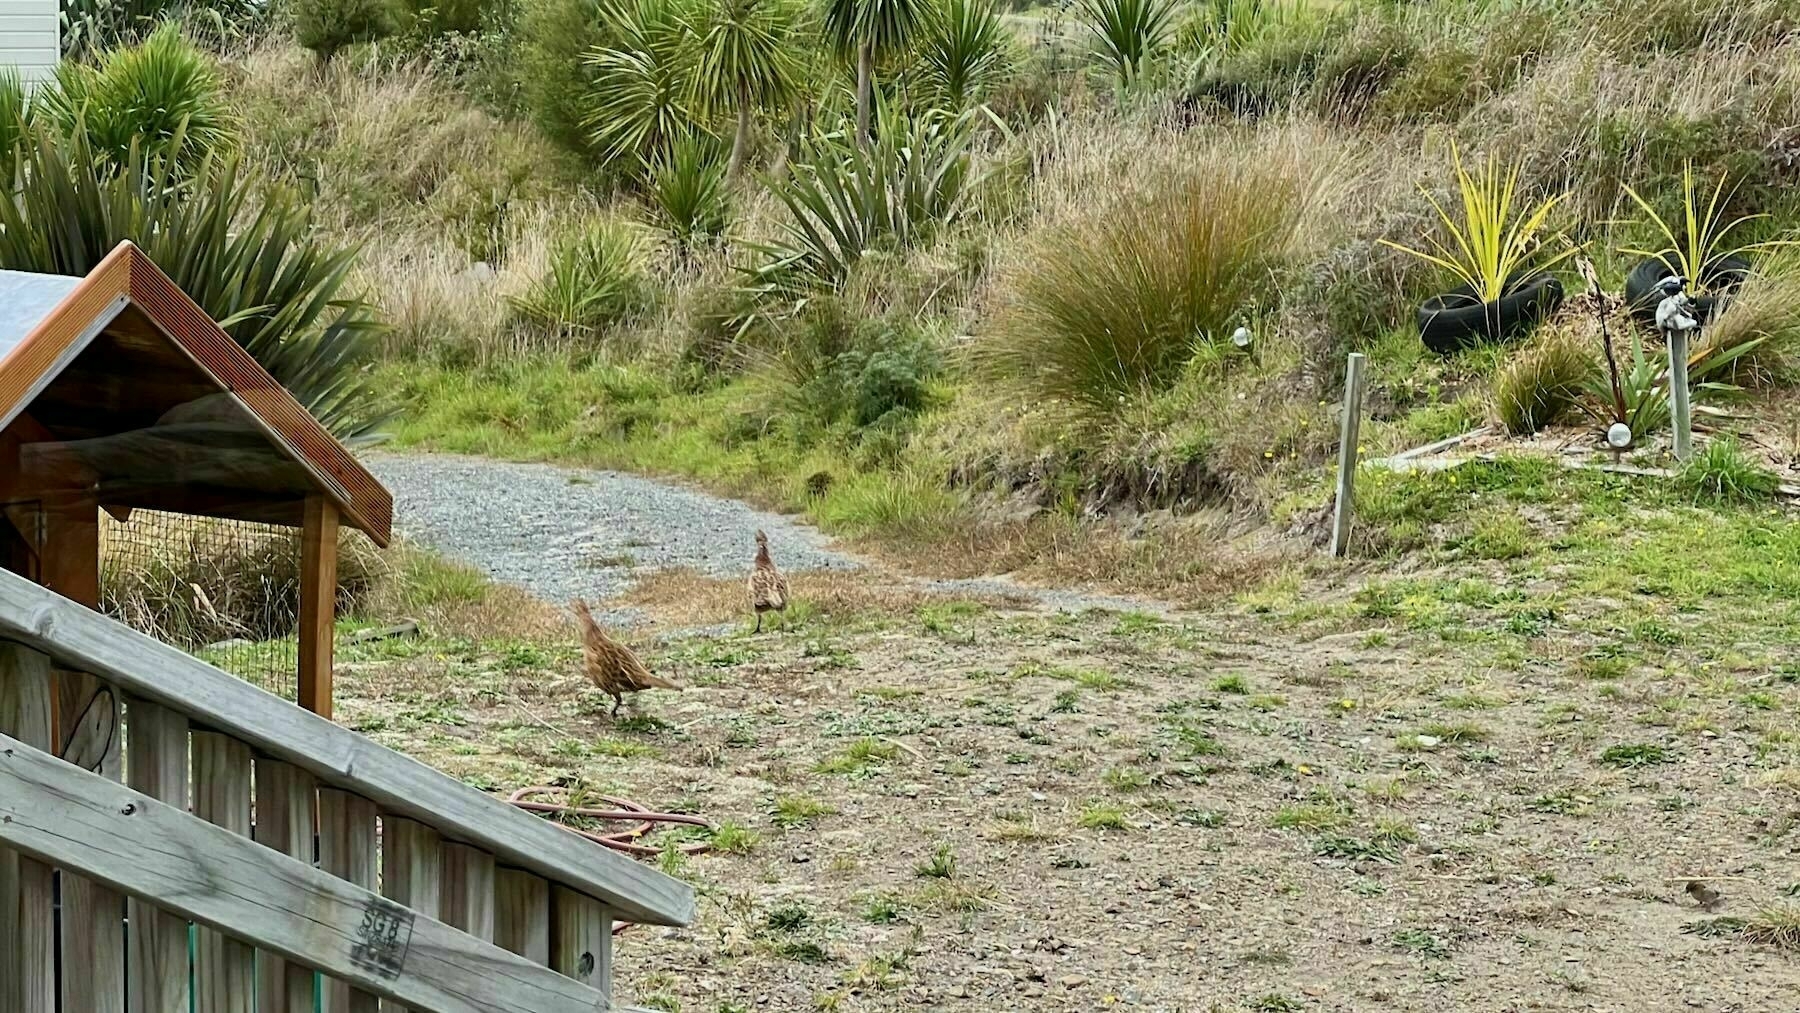 Two young pheasants on an area of grass and sand.  